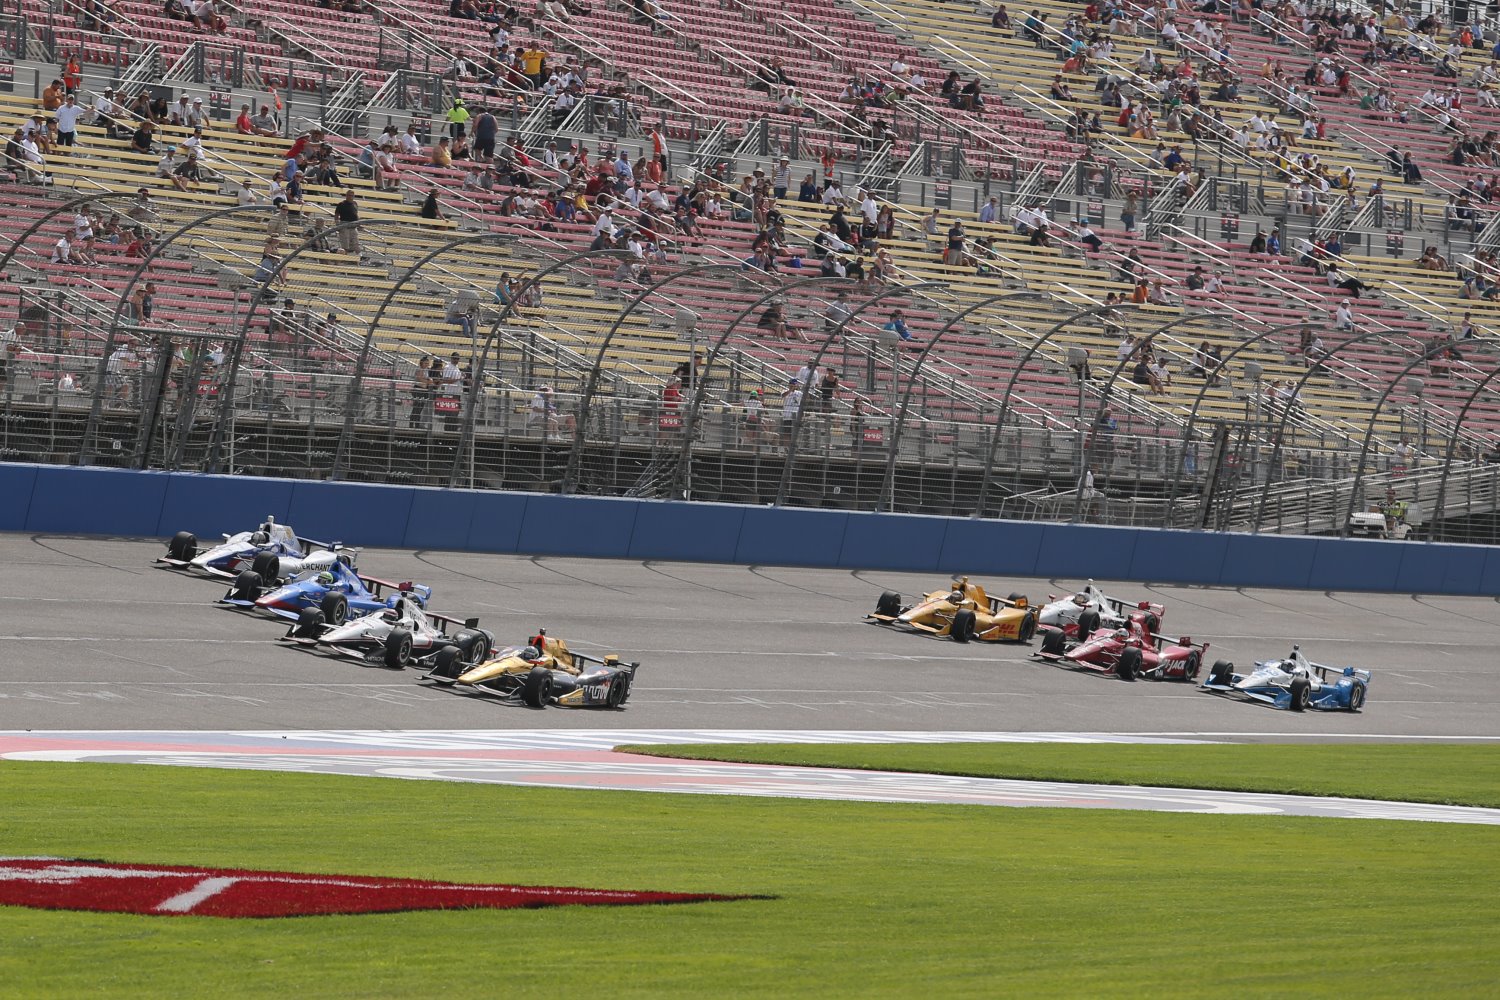 IndyCar drivers are scared to race close. With canopies that fear goes away and the excitement returns.